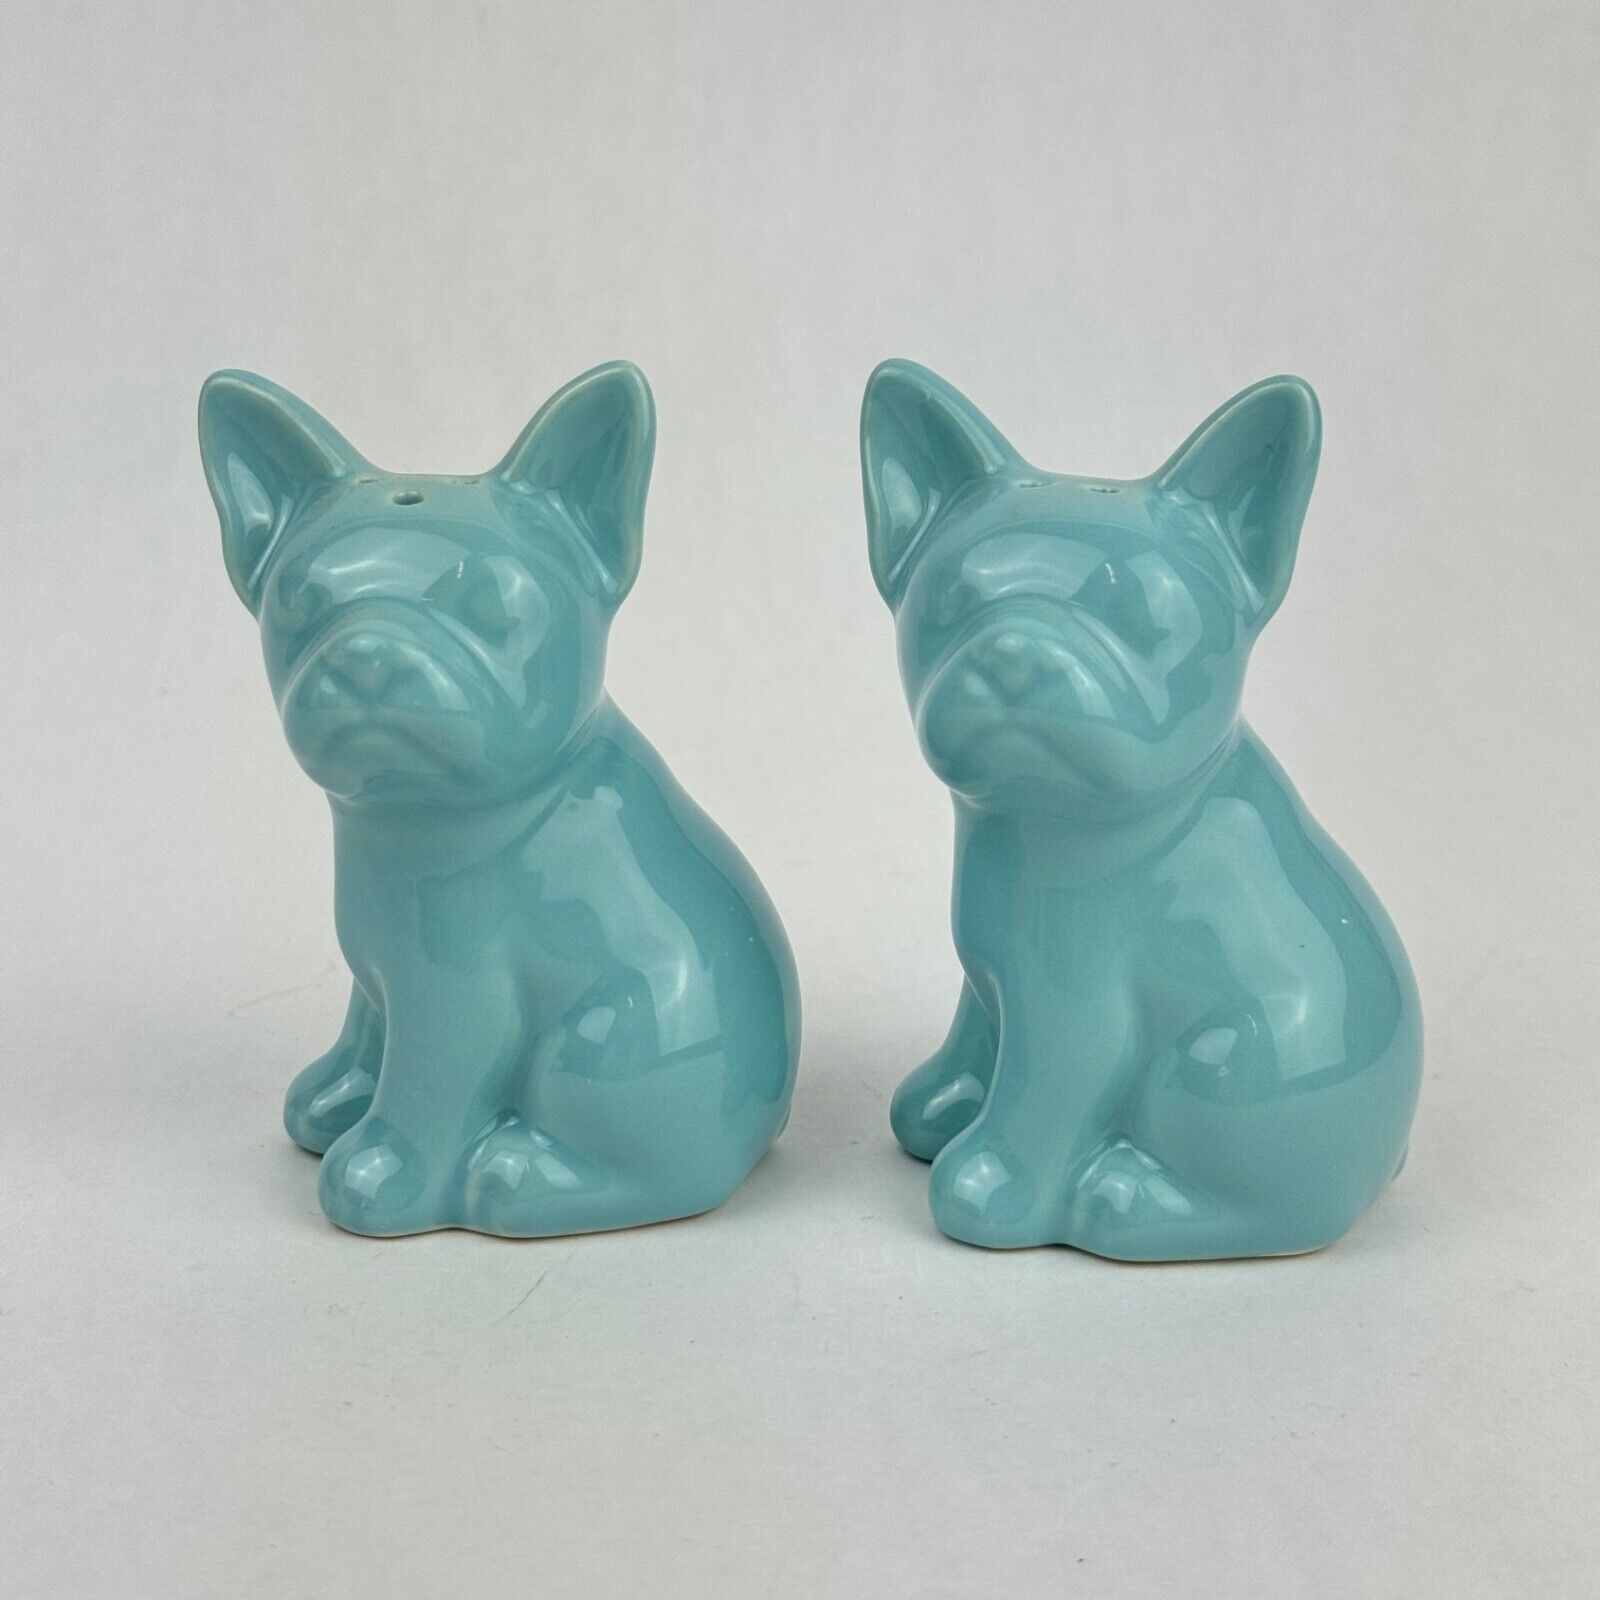 Target Threshold Turquoise French Bulldog Frenchie 3” Salt and Pepper Shakers